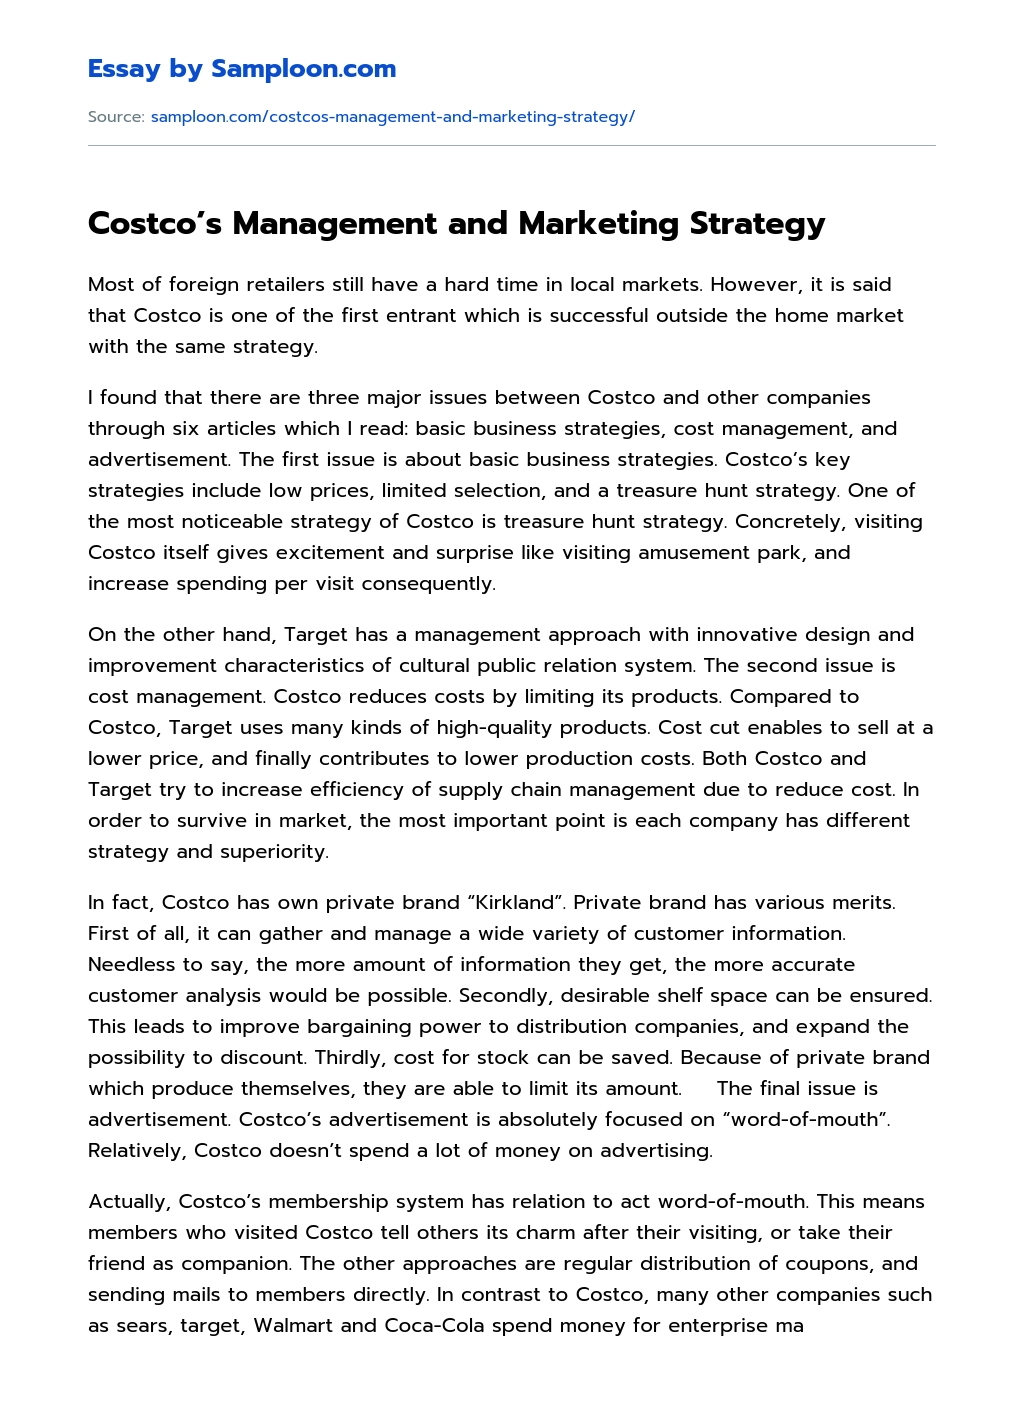 Costco’s Management and Marketing Strategy essay